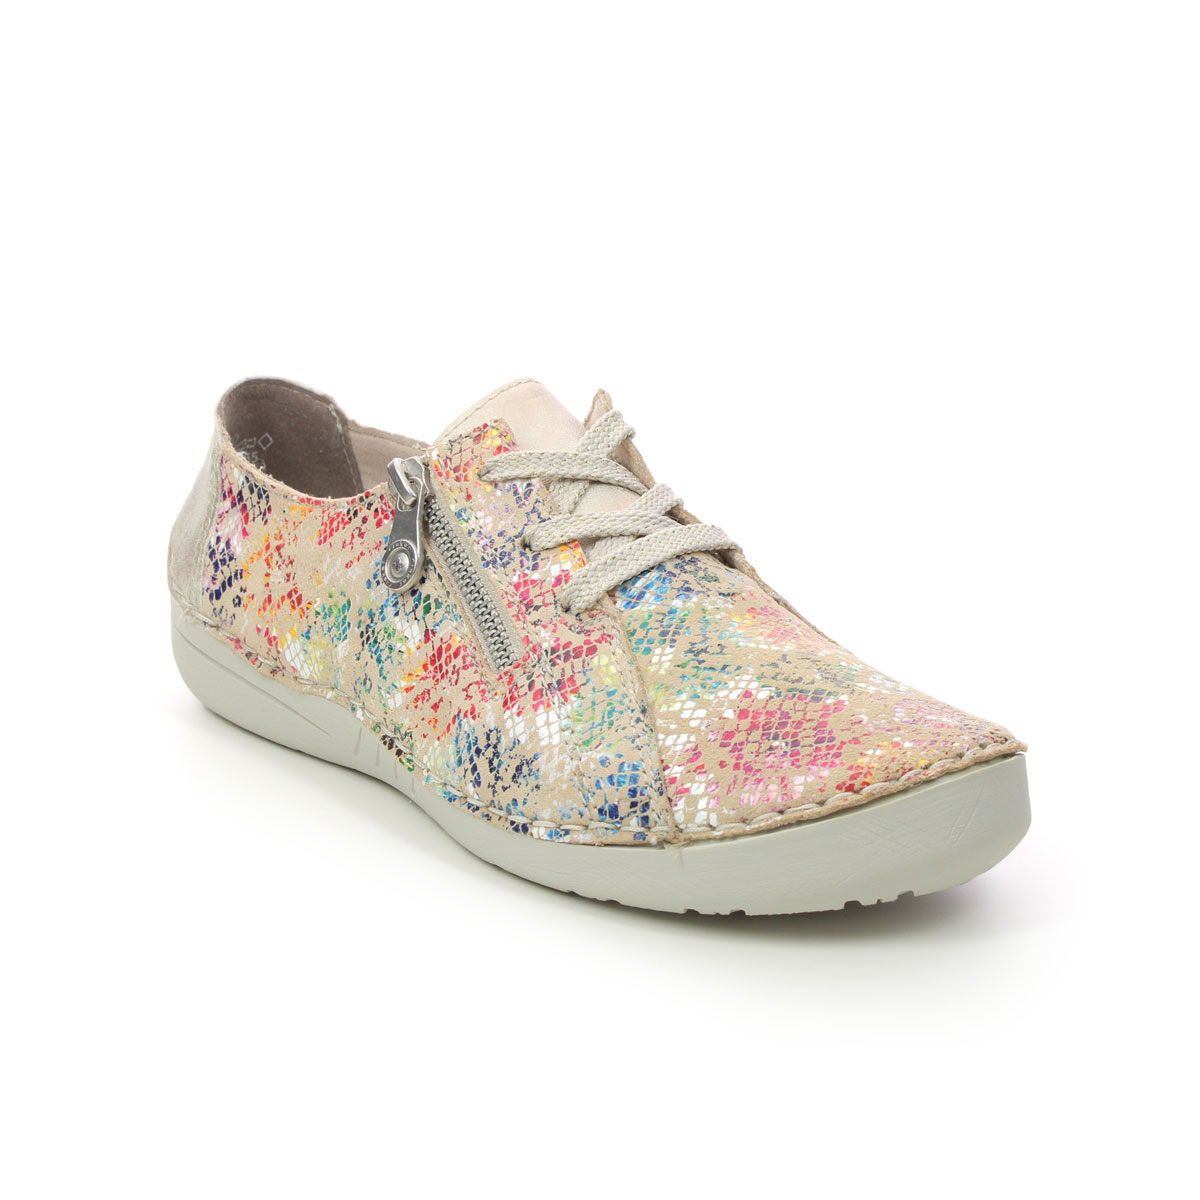 Rieker Funzip Floral Print Womens Lacing Shoes 52511-90 In Size 38 In Plain Floral Print